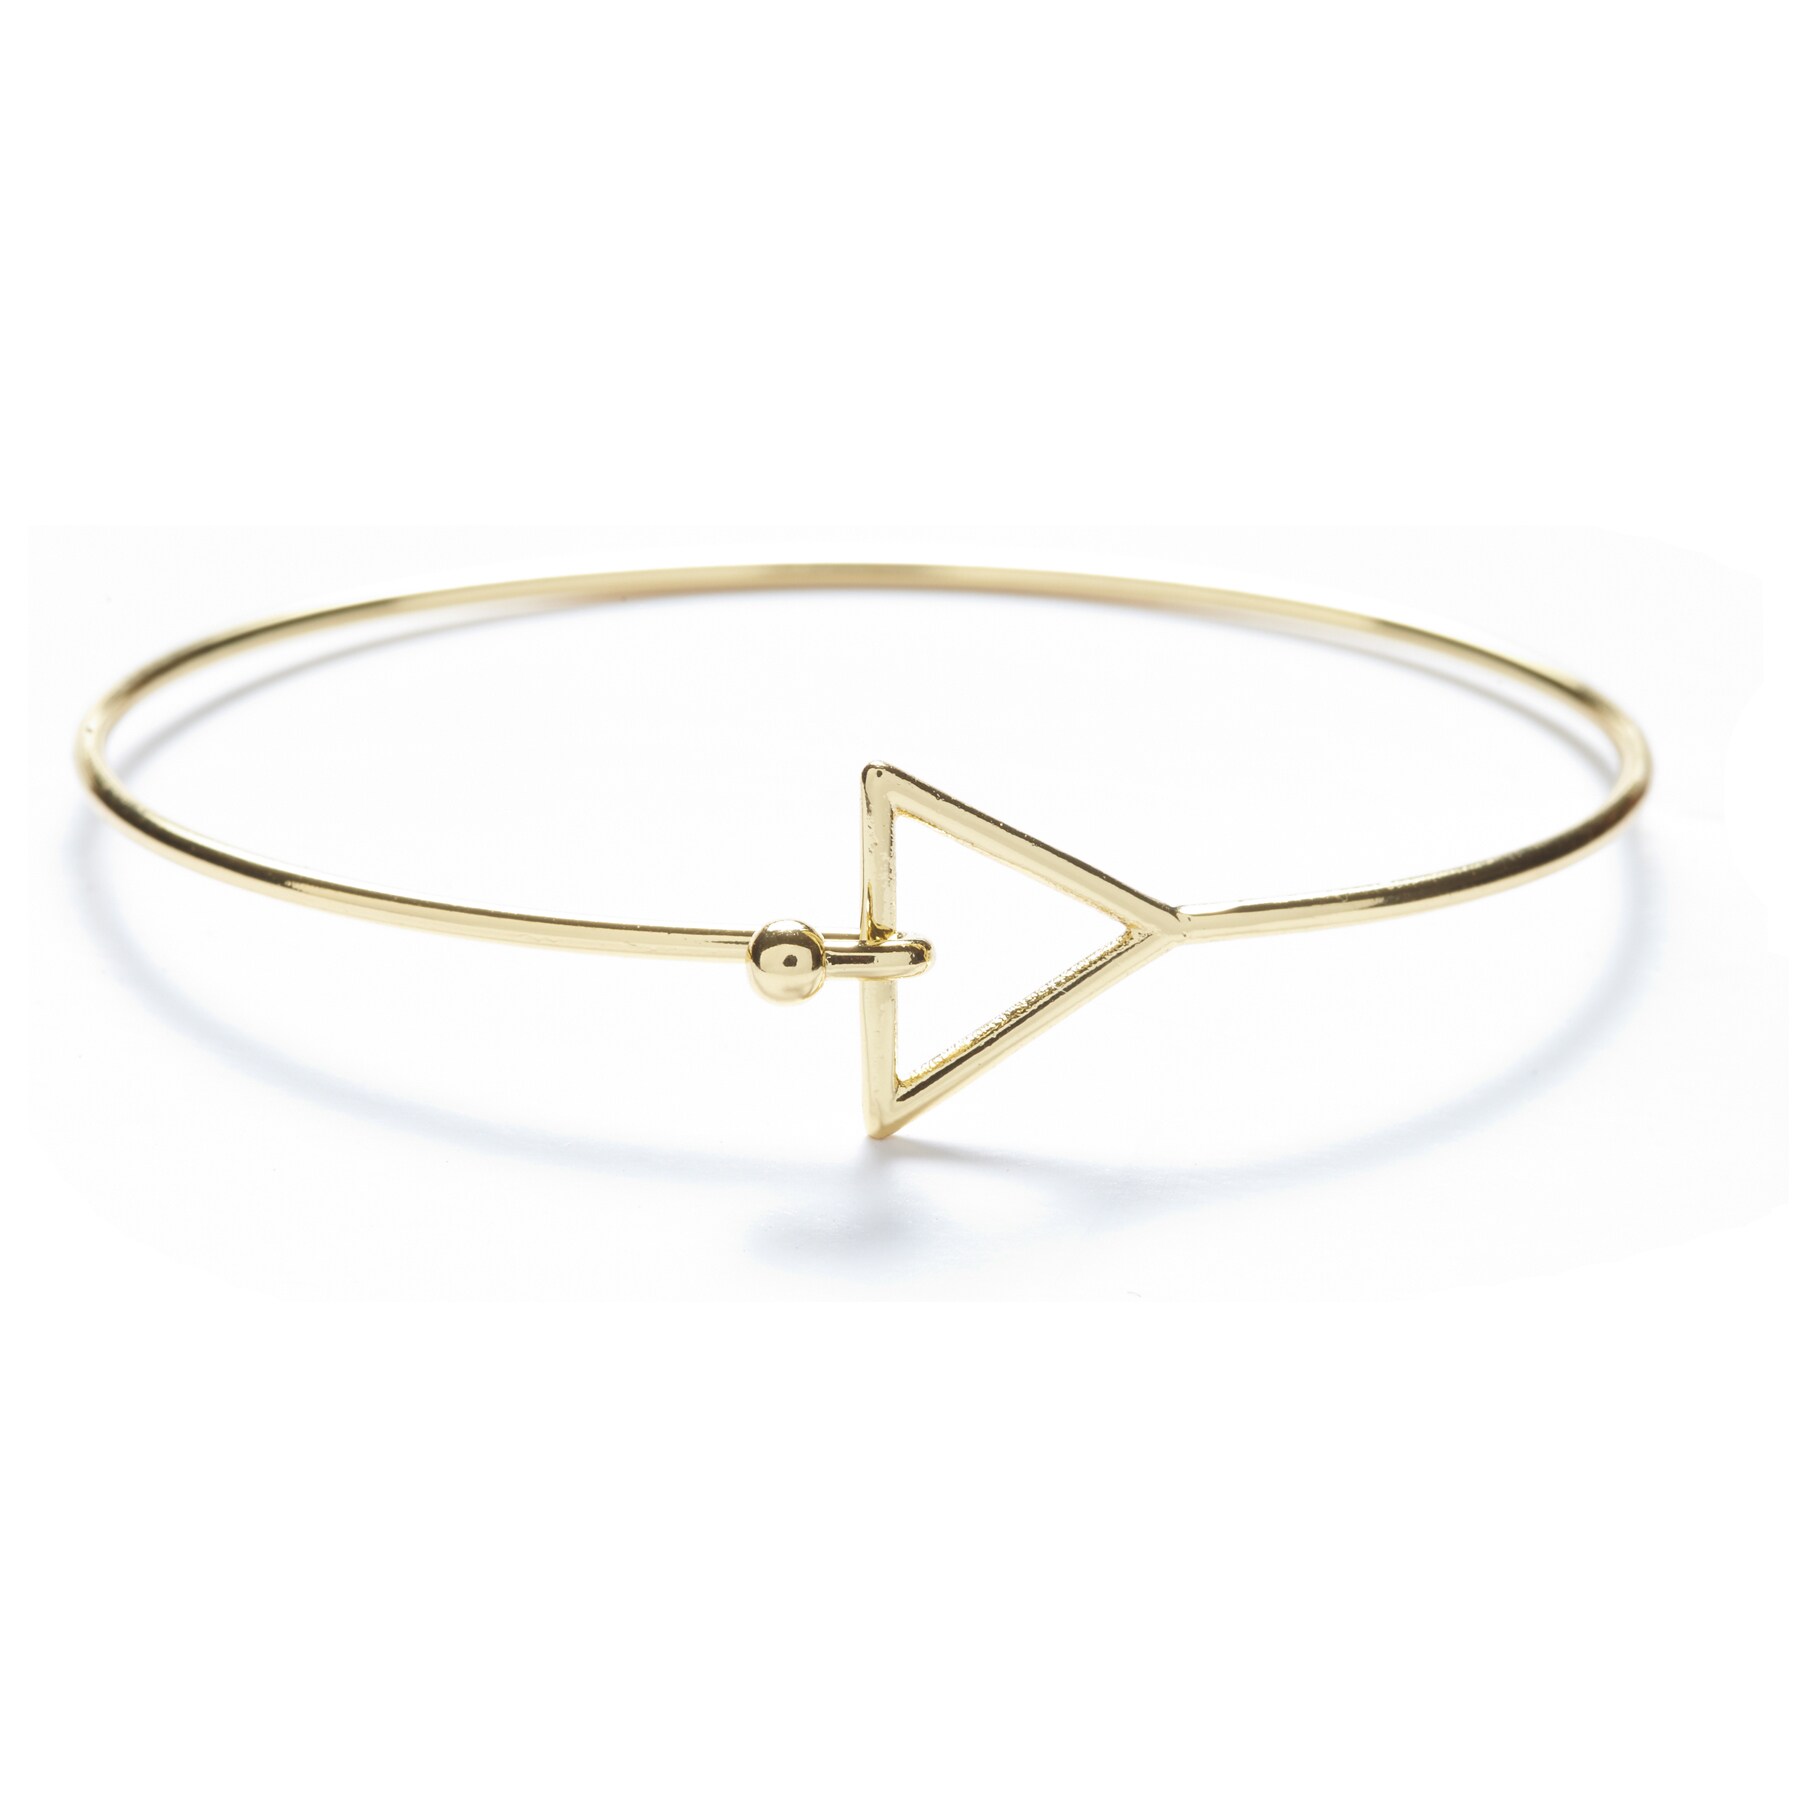 Alchemy Jewelry Handmade Ethical Sacred Geometric Triangle Bangle with 22k Gold Overlay and Fishhook Clasp